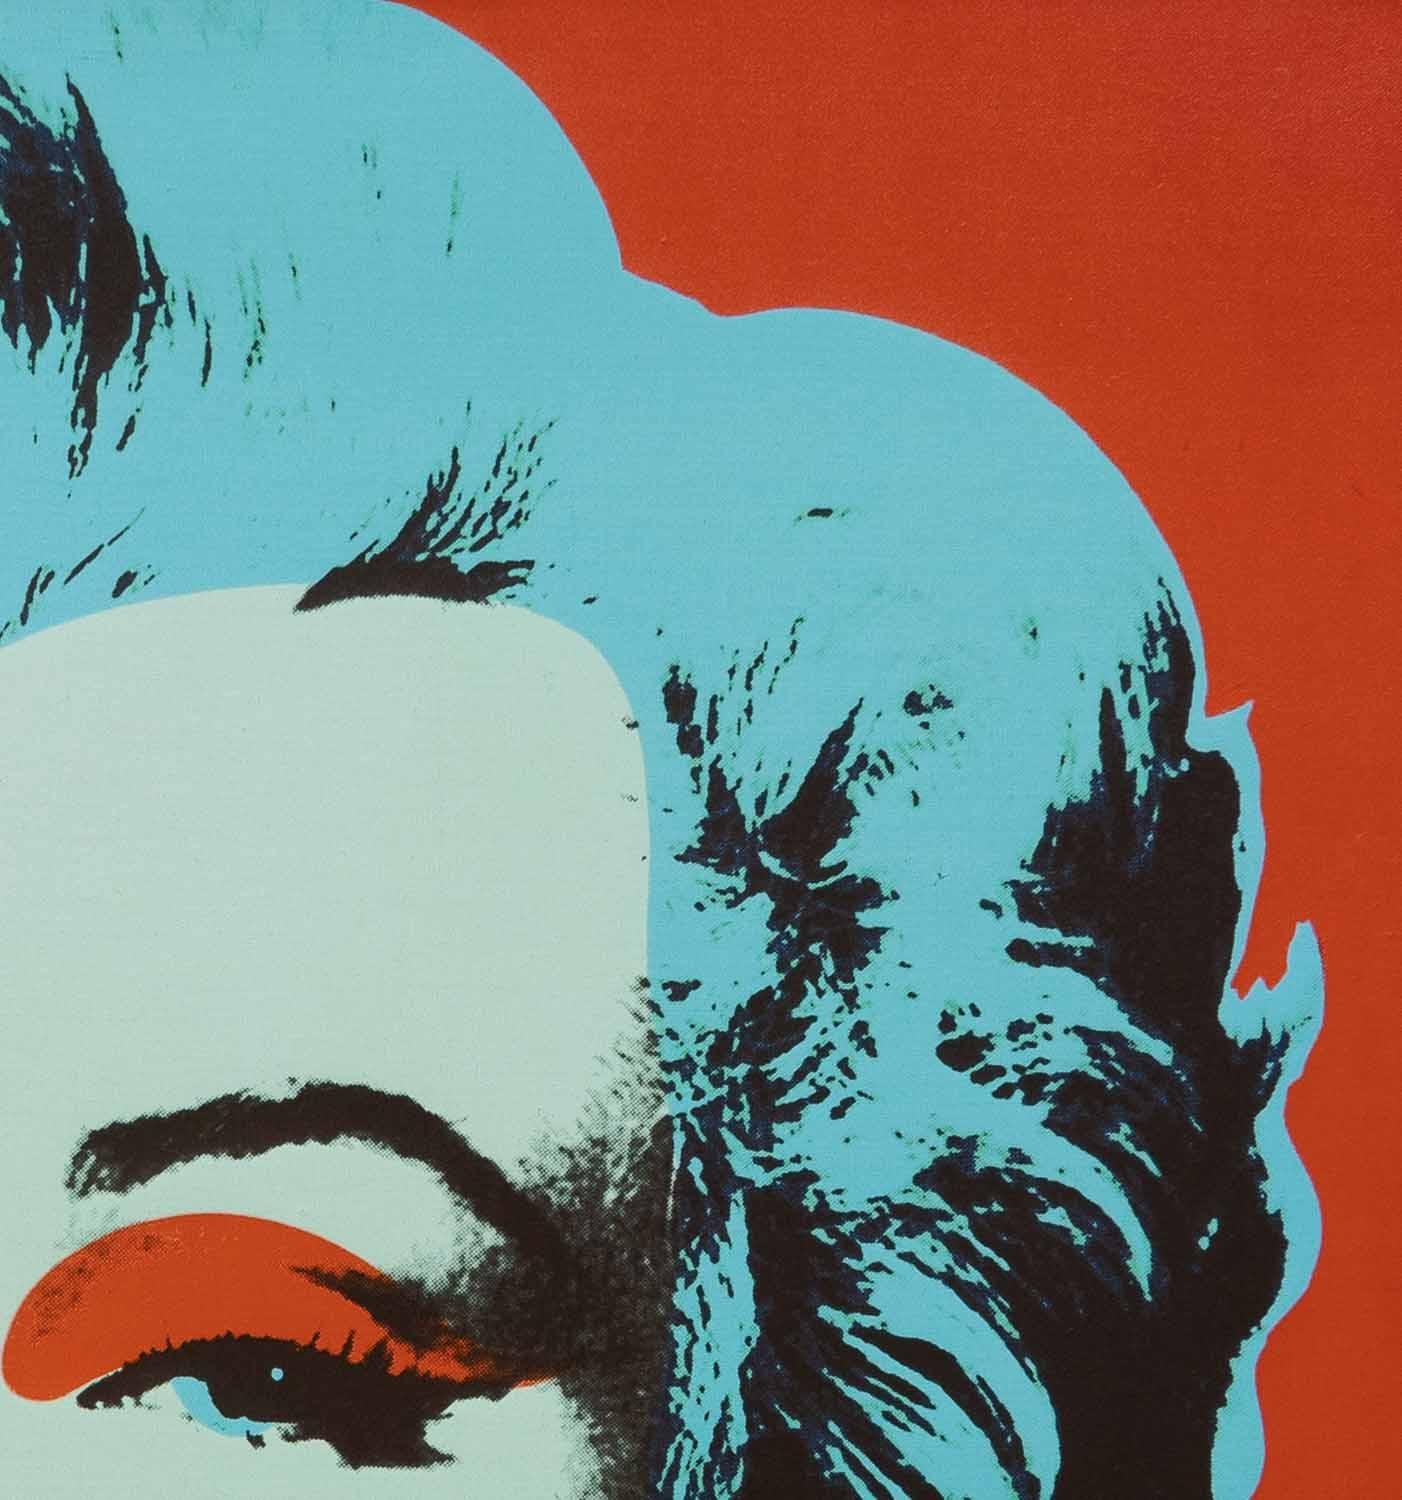 Artwork by Andy Warhol, Marilyn, Made of Giclee Print on linen